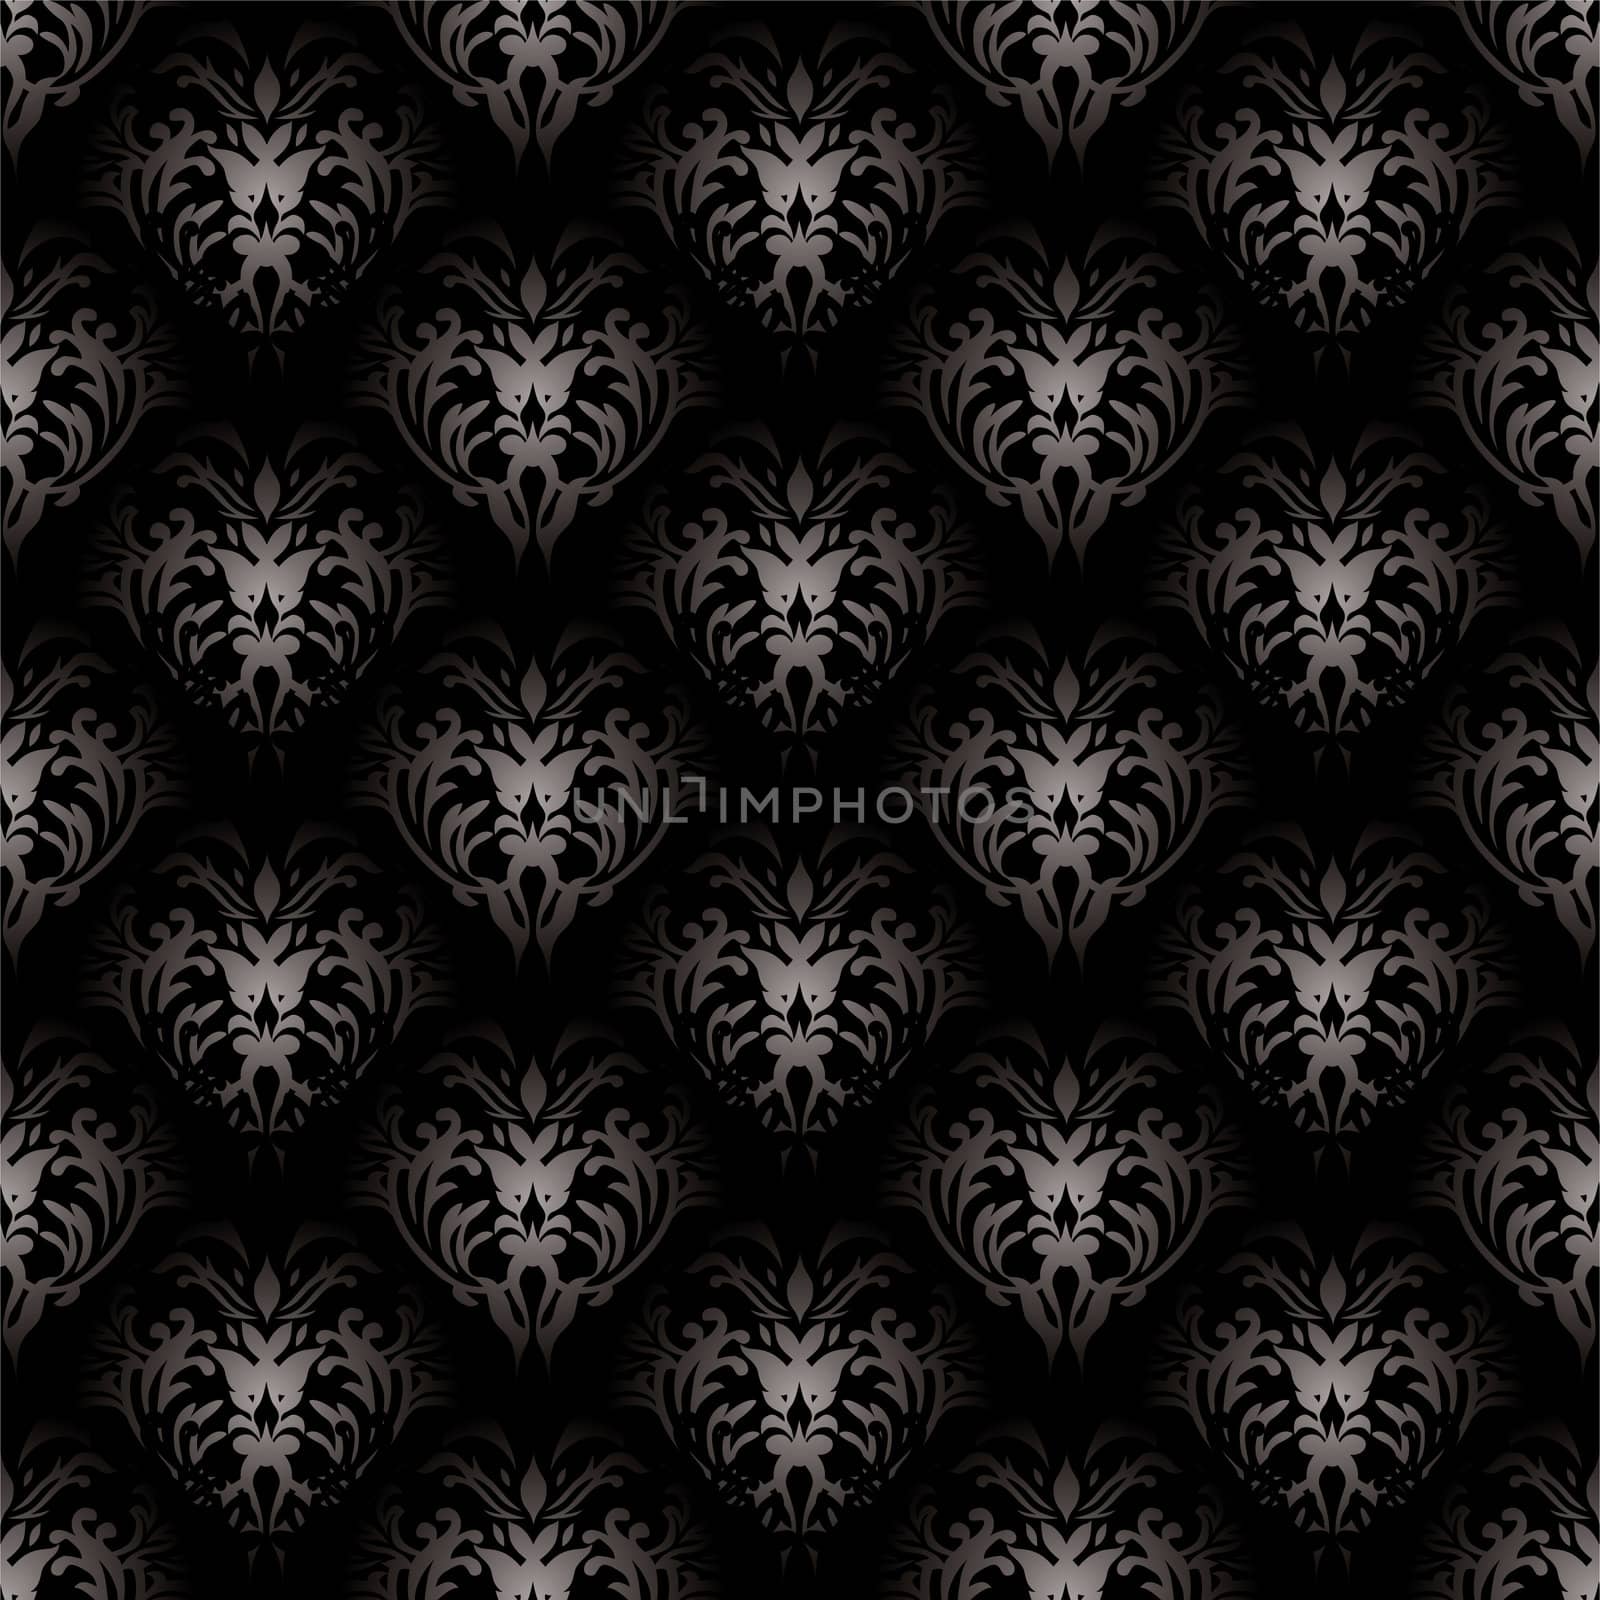 Silver and black floral inspired background that seamlessly tiles